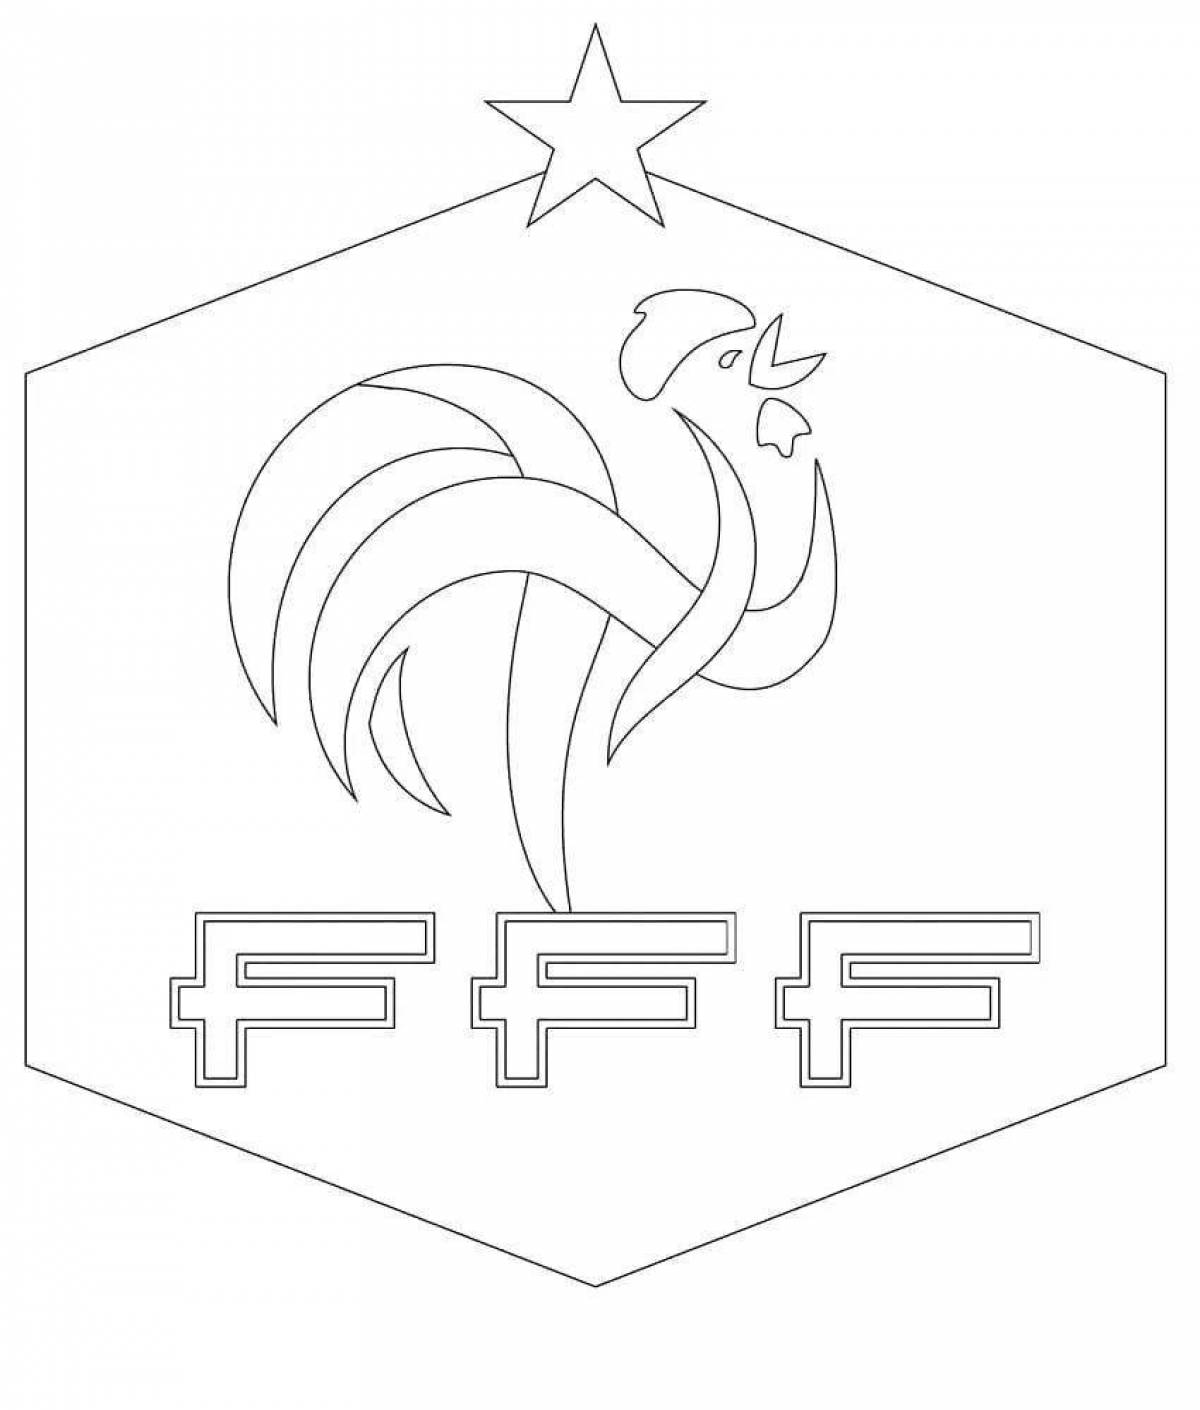 Animated emblem coloring page